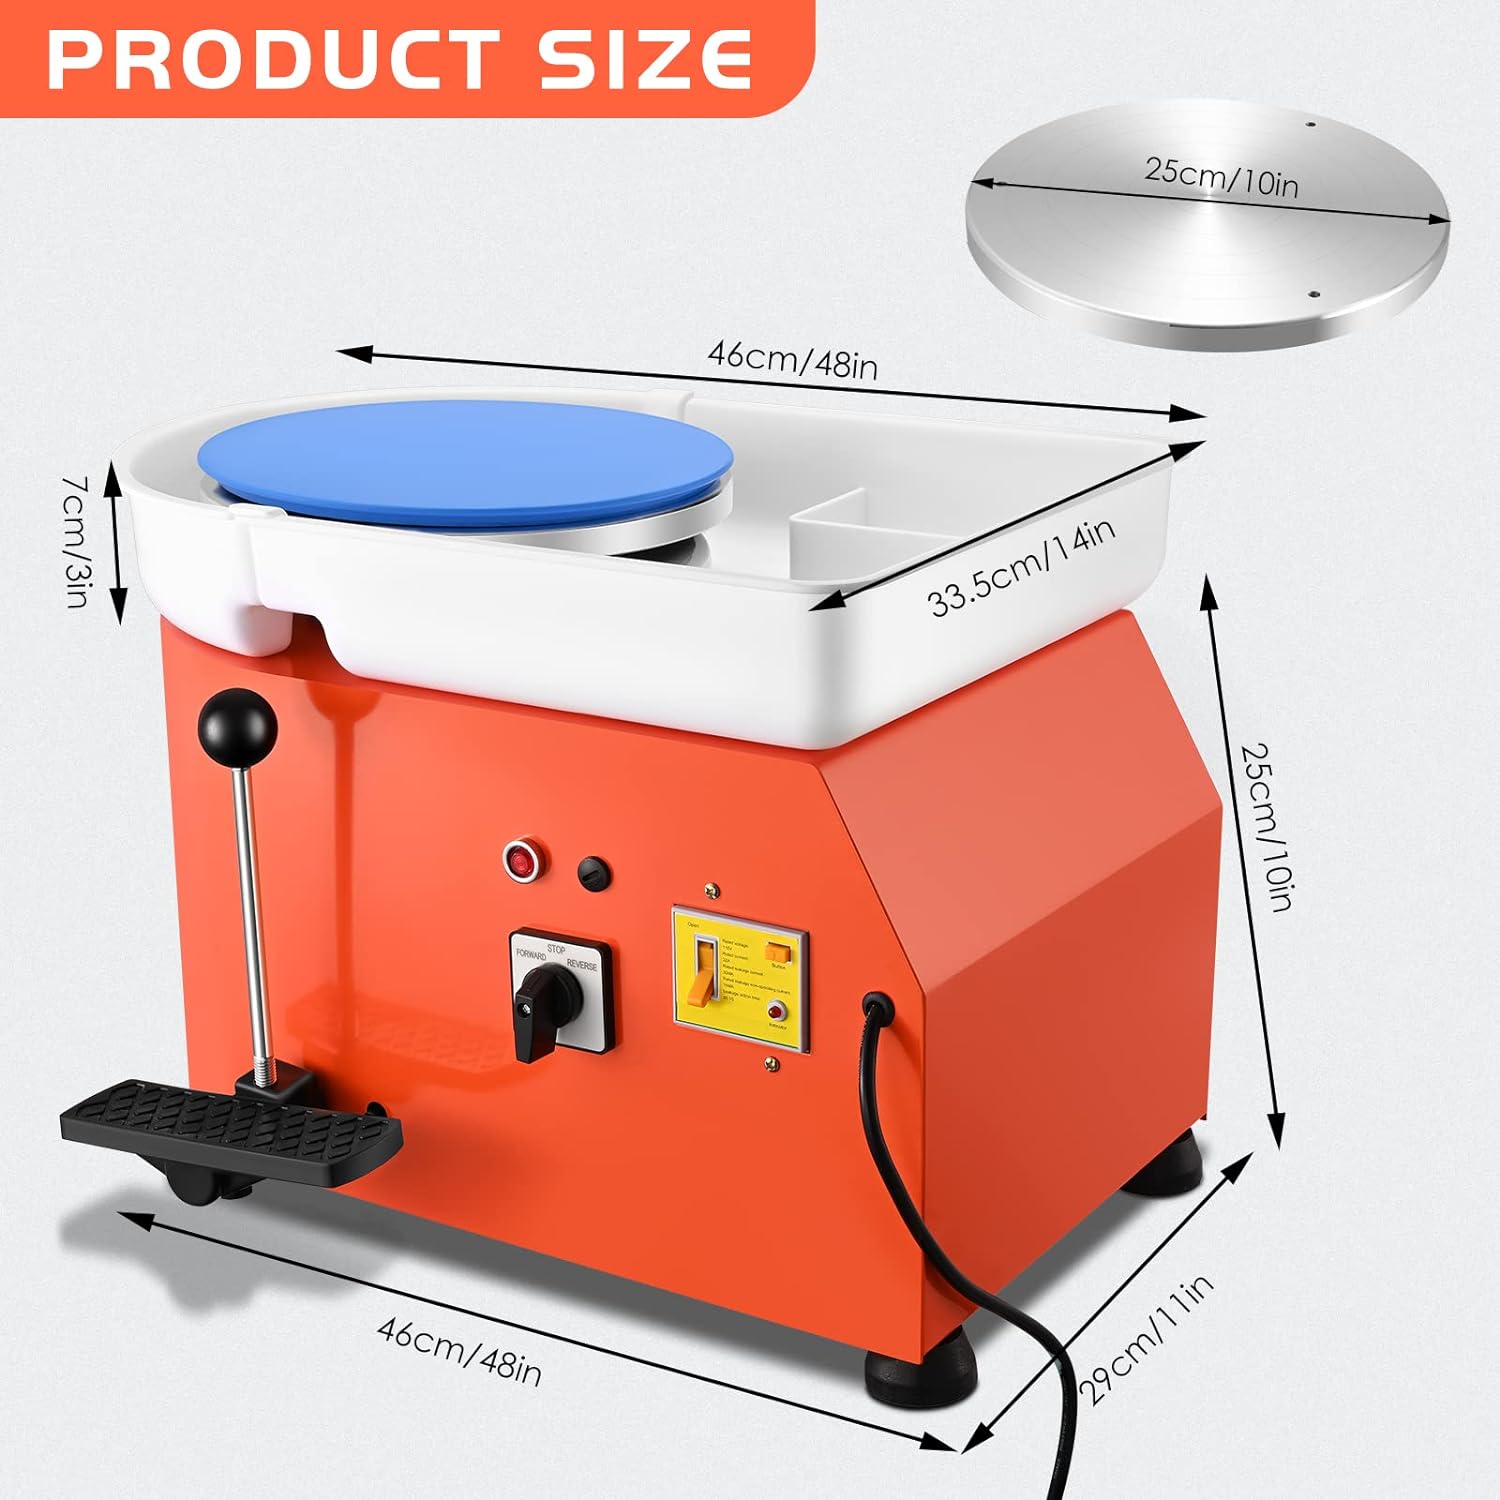 Upgraded Pottery Wheel Machine with Bat, 25cm 350W Electric Pottery Forming Machine with Removable Basin, Punching Turntable Bat and 14Pcs DIY Clay Tools, Ideal for Ceramic Clay Art Craft 110V